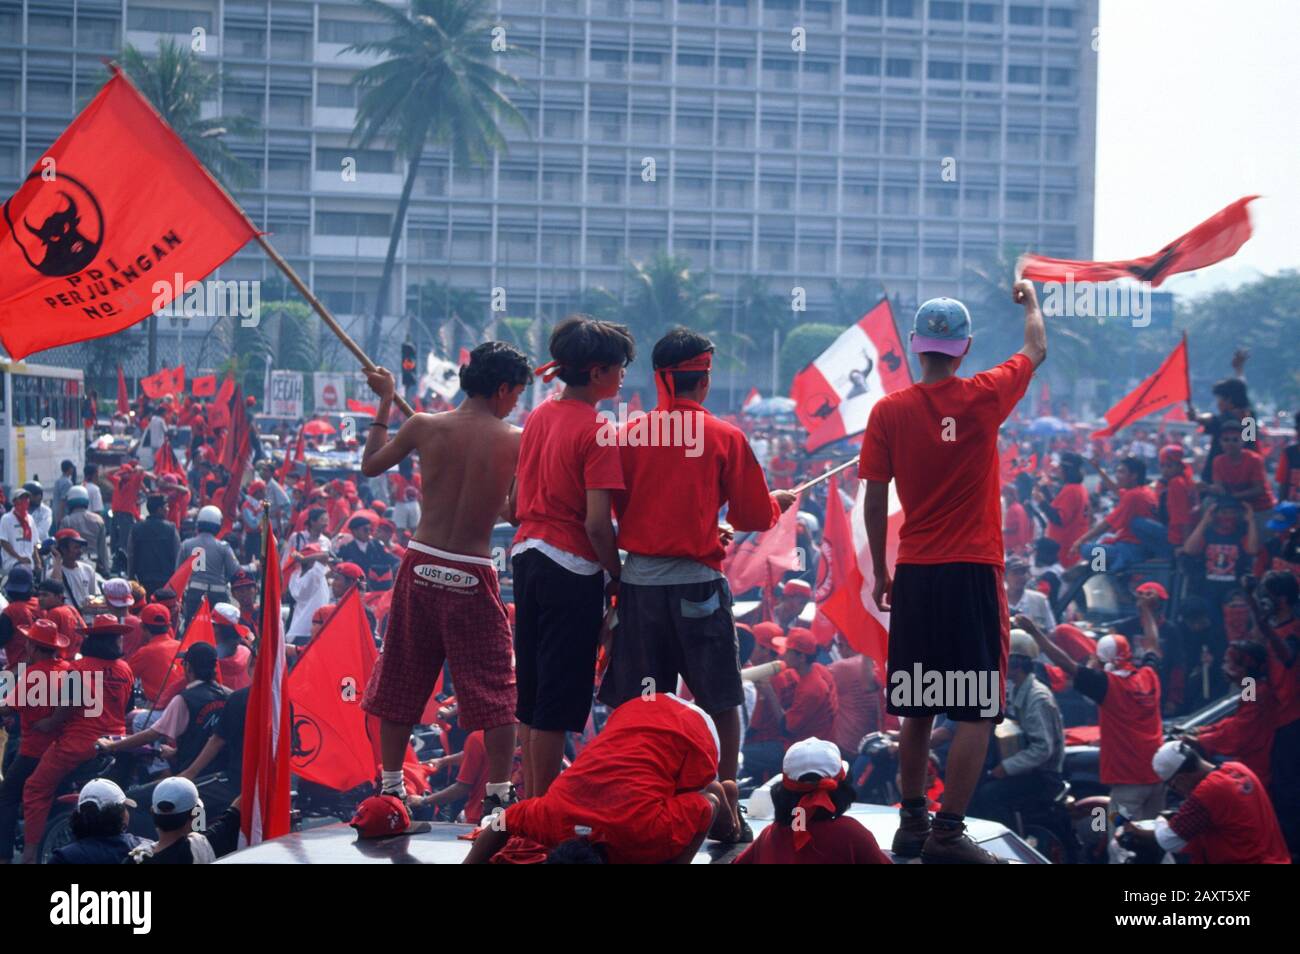 Indonesia after the fall of Suharto. Supporters of Megawati Sukarnoputri and the Partai Demokrasi Indonesia (PDI), flood onto the streets of Jakarta, Indonesia, during an election campaign, June 1999 Stock Photo